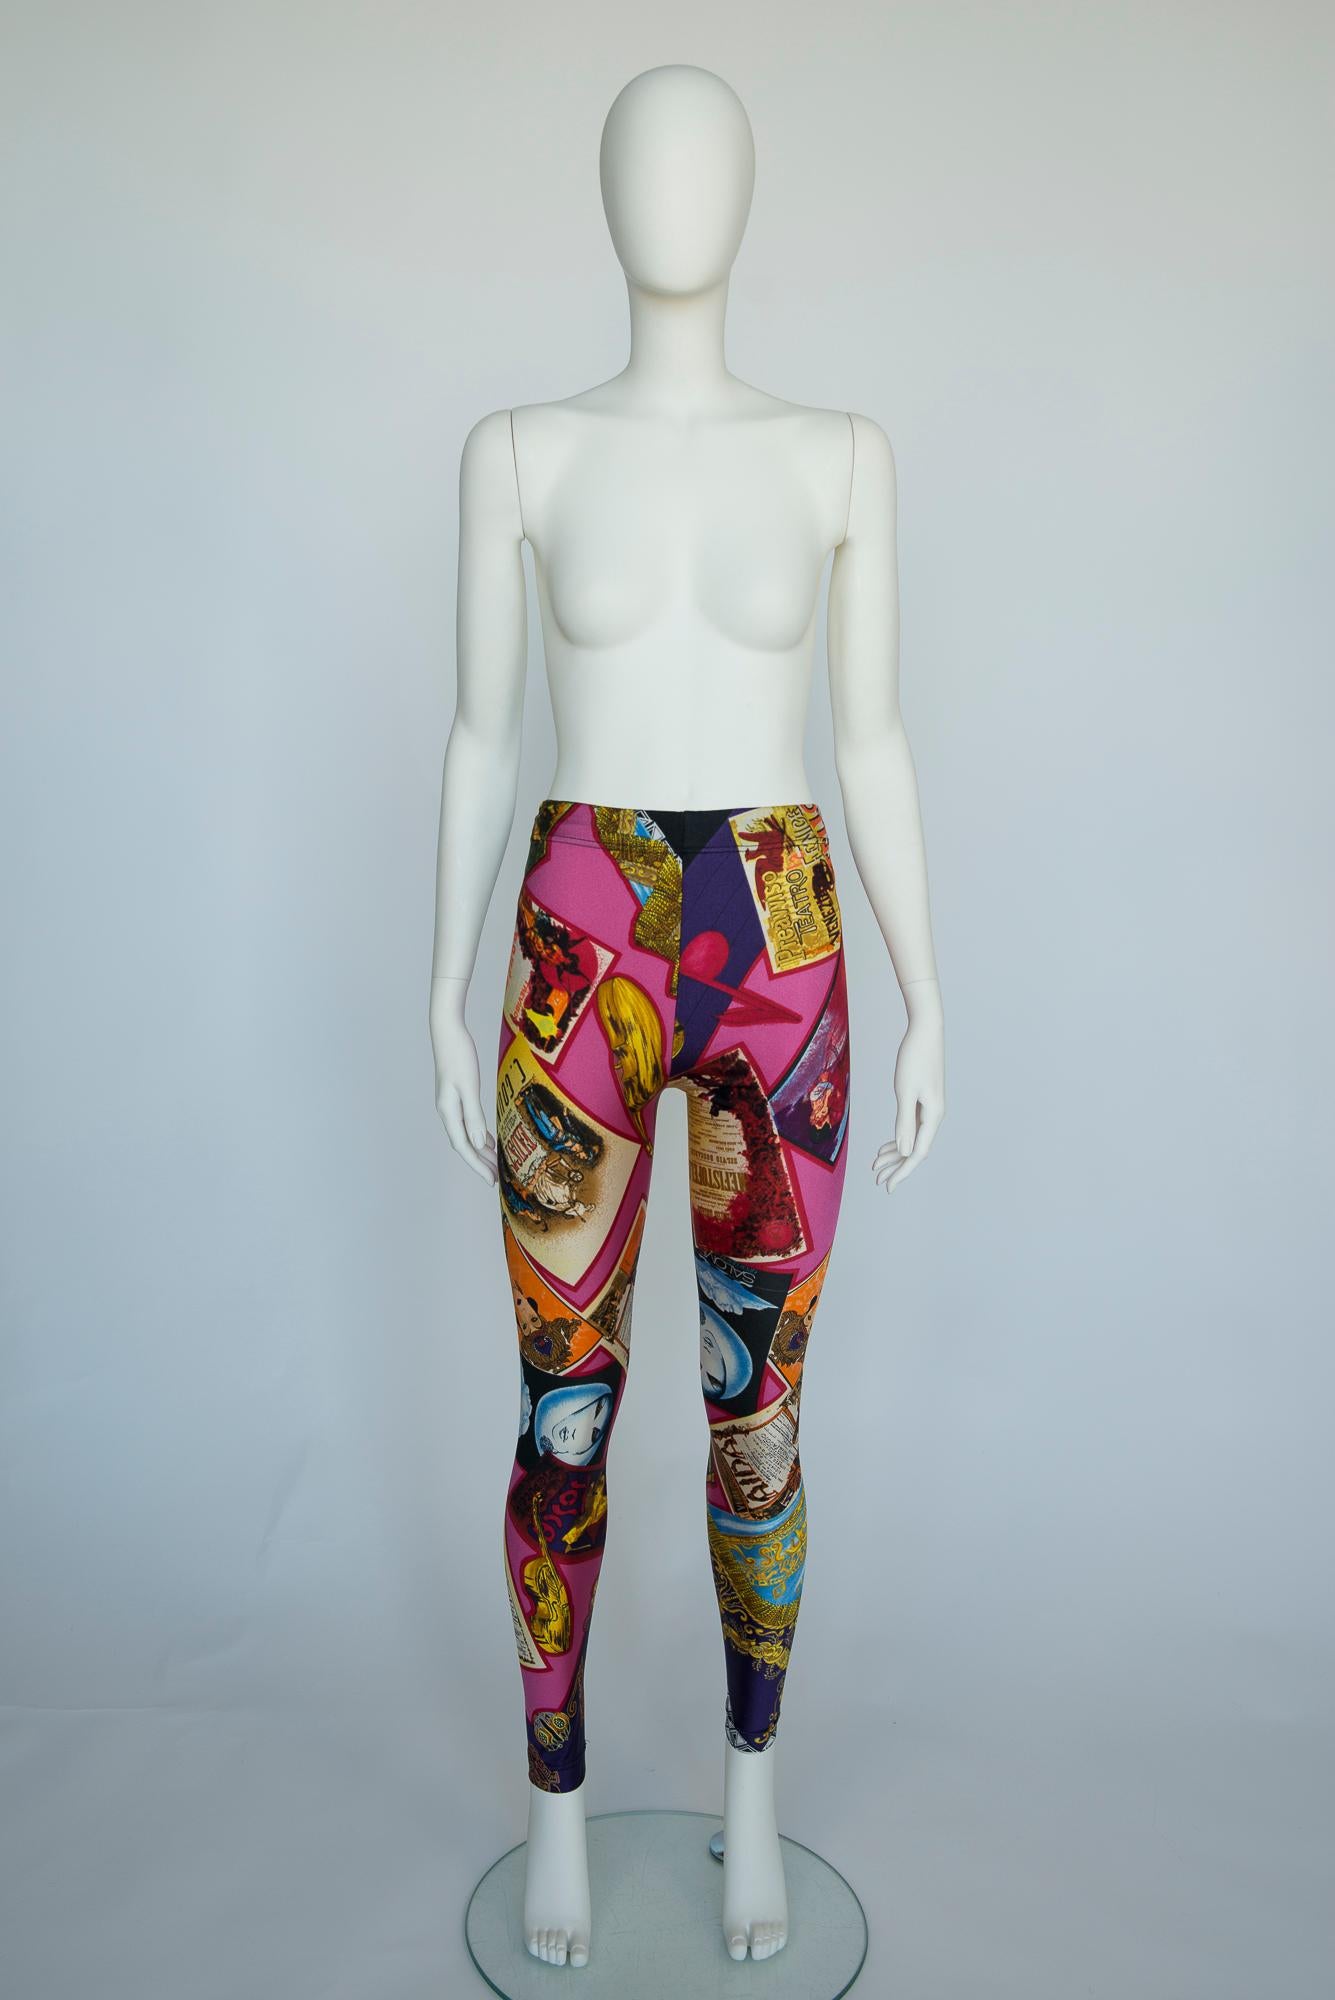 From the coveted 1991 Fall-Winter Versace collection, these second-skin printed leggings are instantly recognizable as a design by Gianni Versace.
Cut from smooth stretch fabric (80% polyamide & 20% elastane) and having an elasticated high-rise